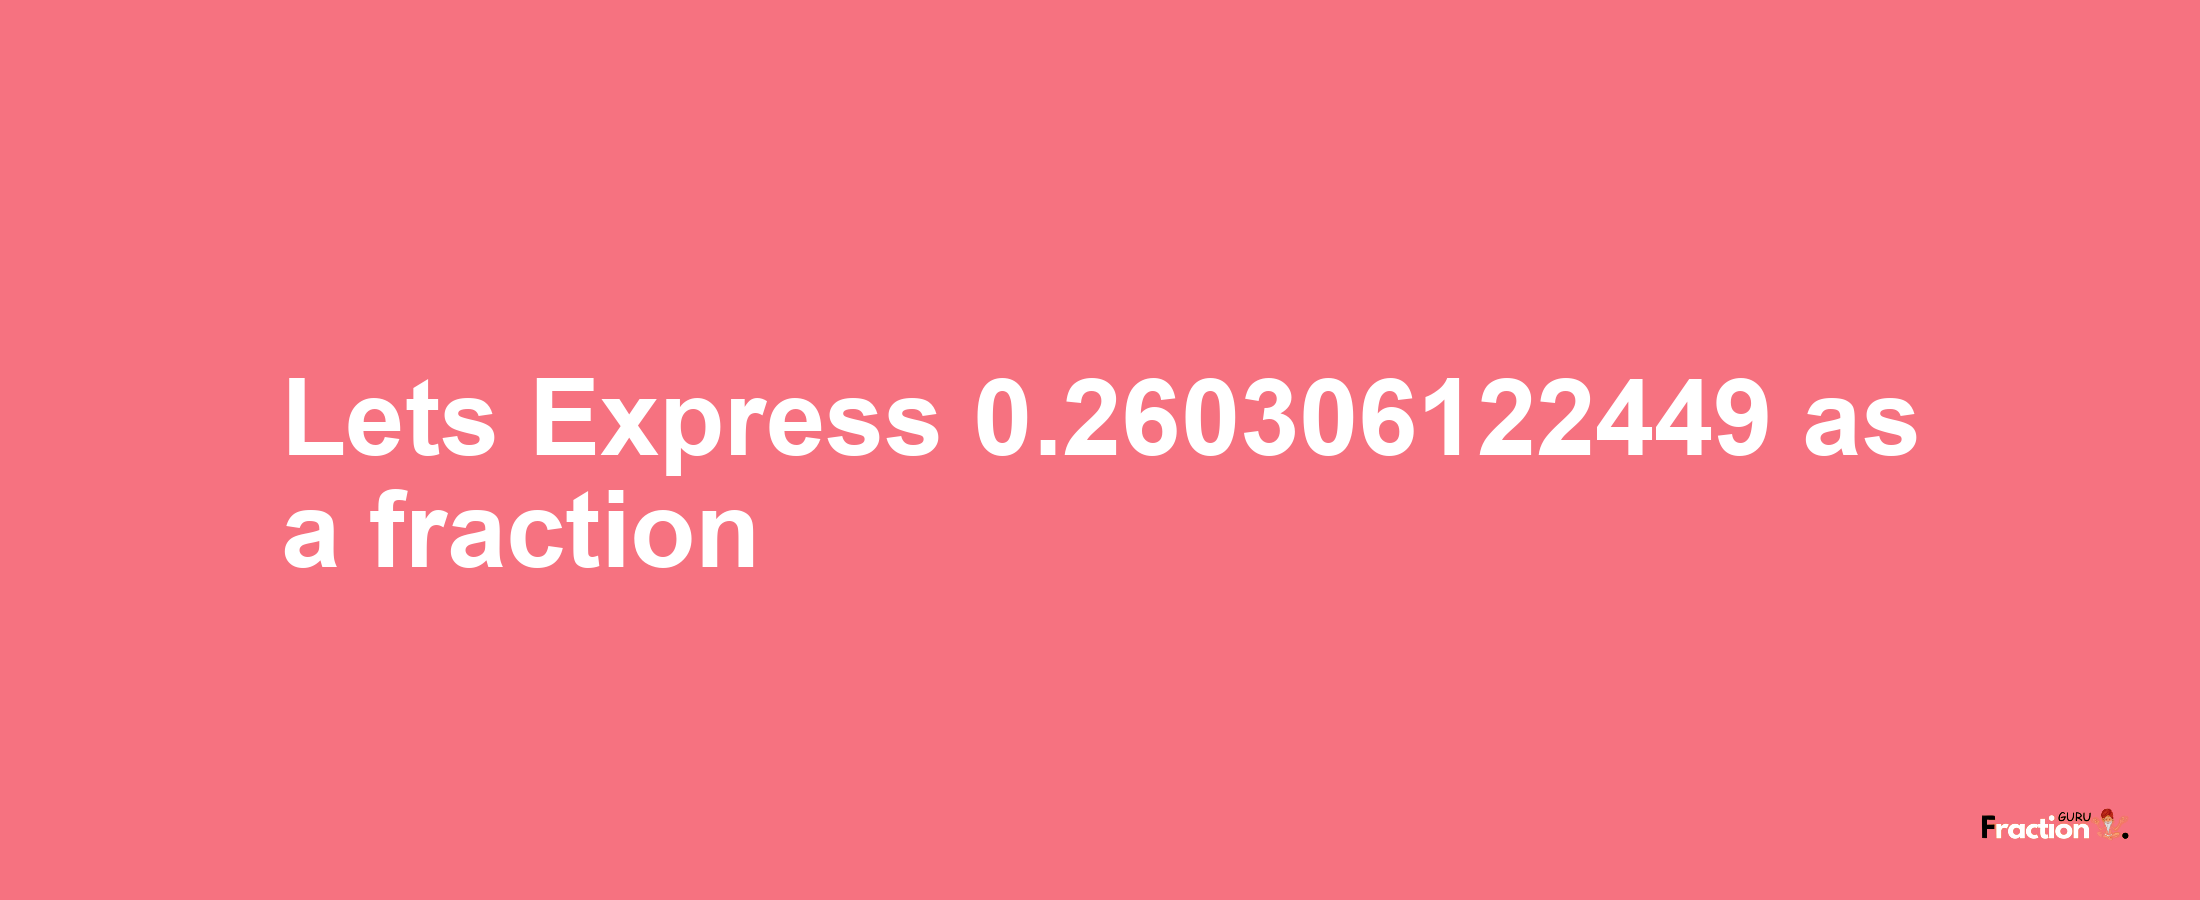 Lets Express 0.260306122449 as afraction